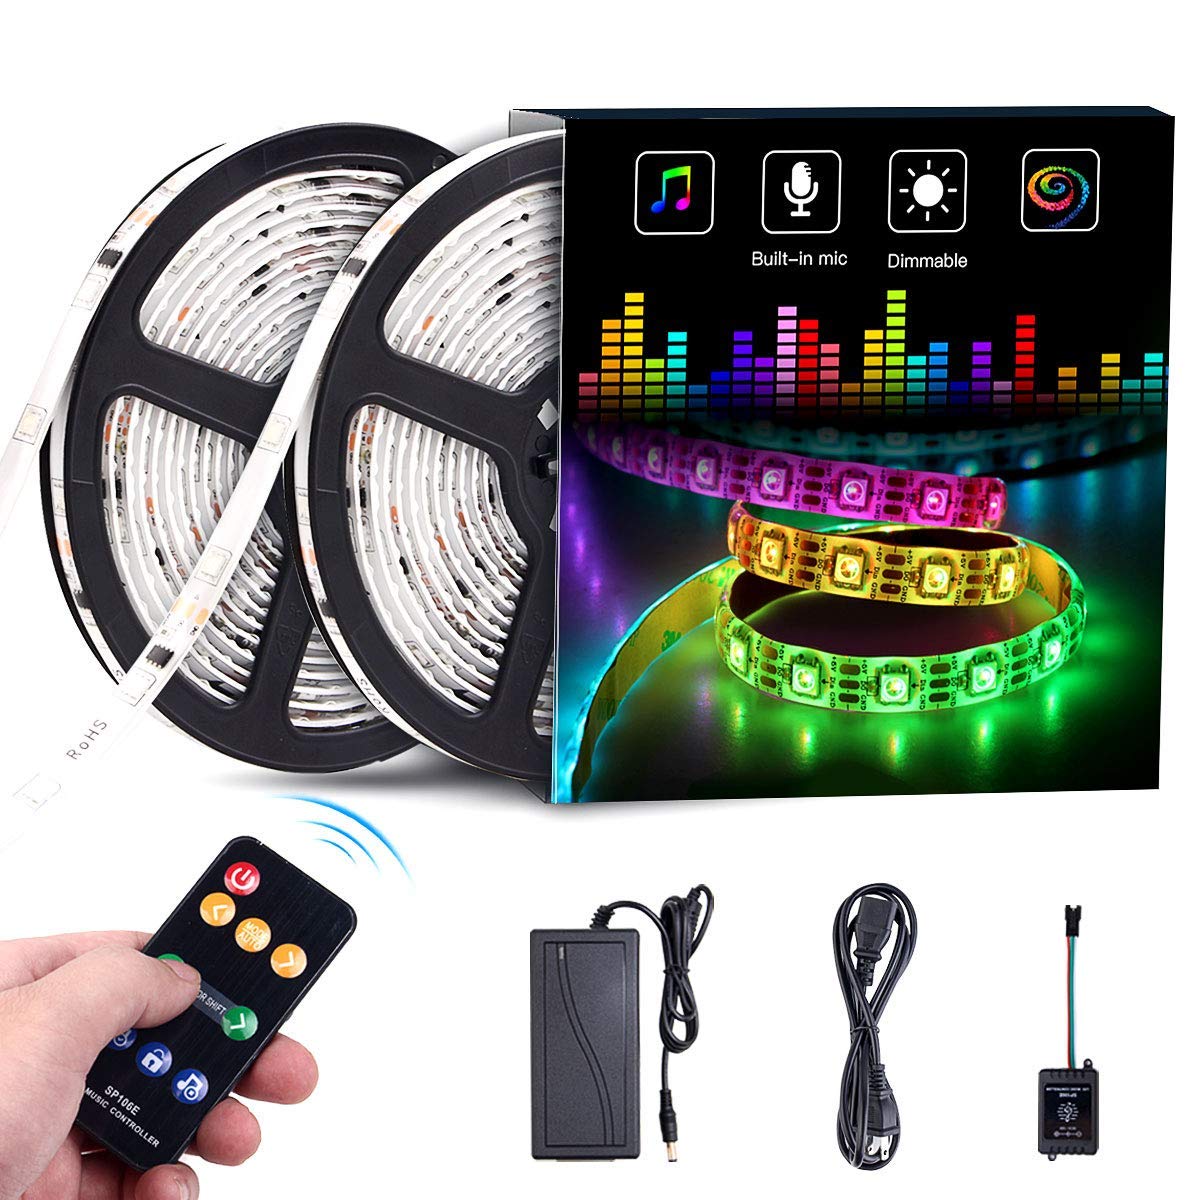 32.8ft/10m Dream Color LED Light Built-in IC, RGB 300Leds SMD5050 Flexible Strip Lighting with Remote, Color Changing Led Strip Chasing Effect for Home Lighting